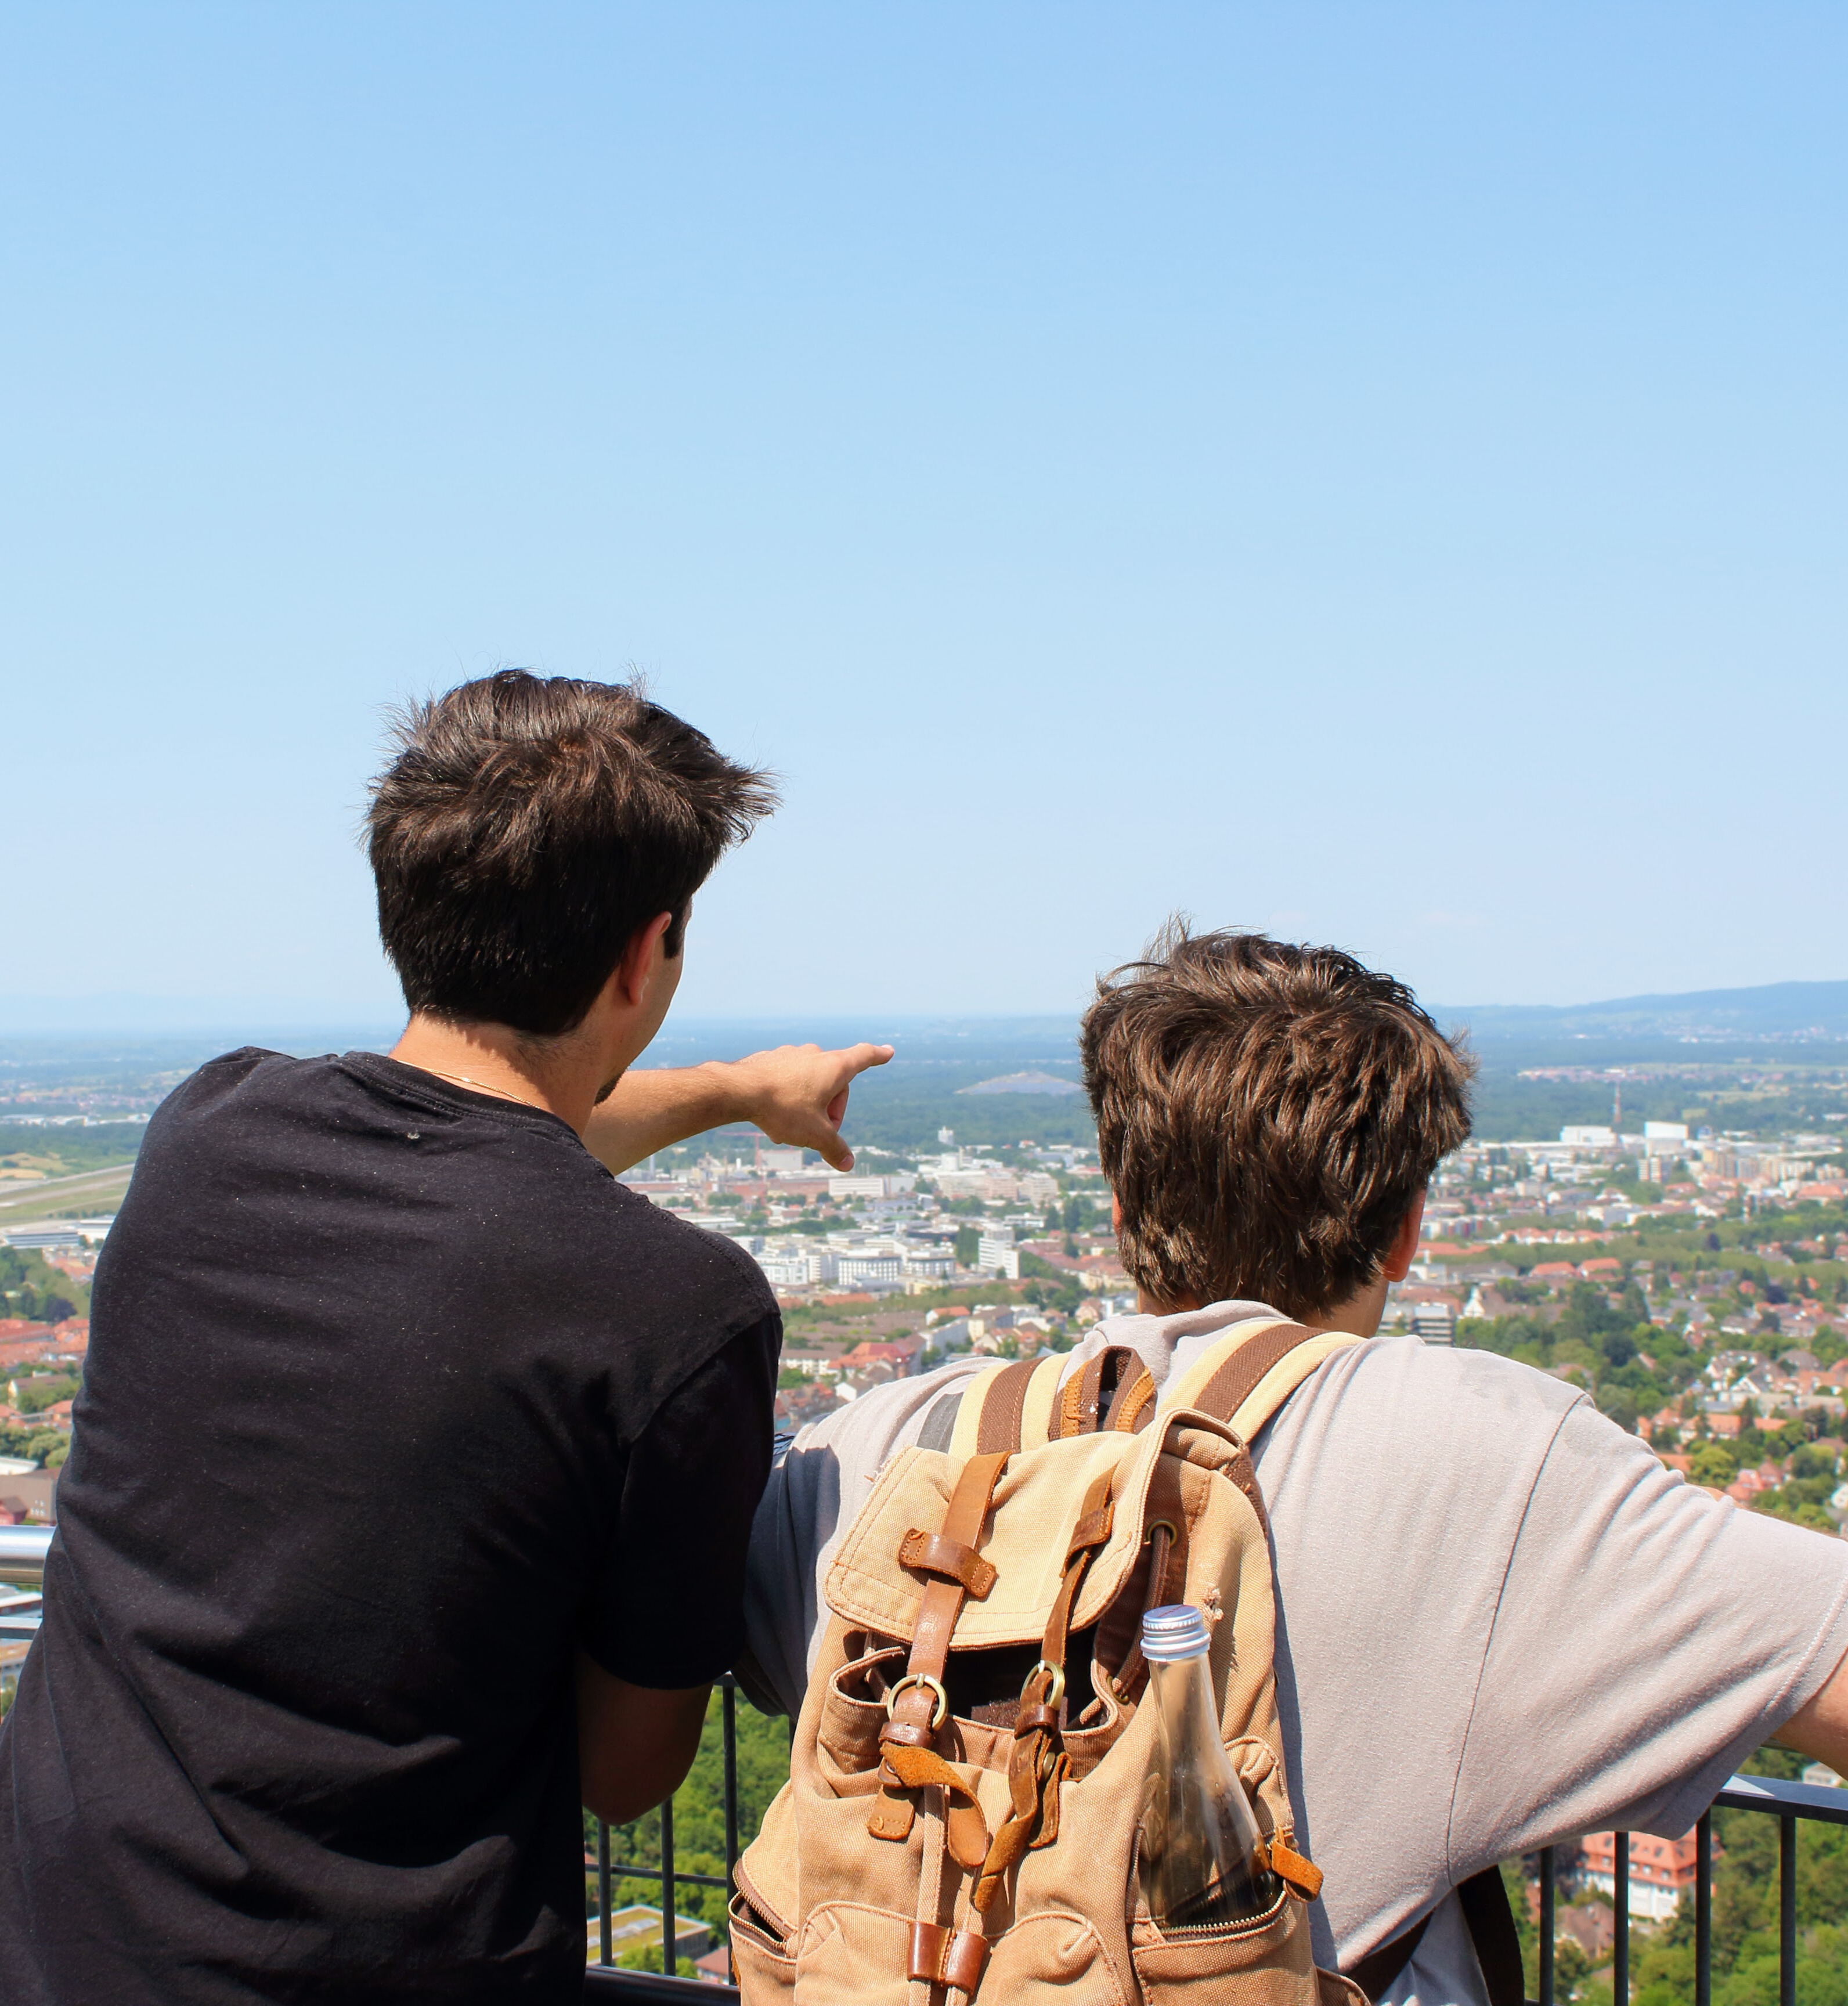 Two young men stand with their backs to the camera, leaning against a railing and looking out over a view of green trees and orange-roofed German buildings. One of the men points to something in the distance. The sky is blue and cloudless, and hazy mountains can be seen in the distance. 